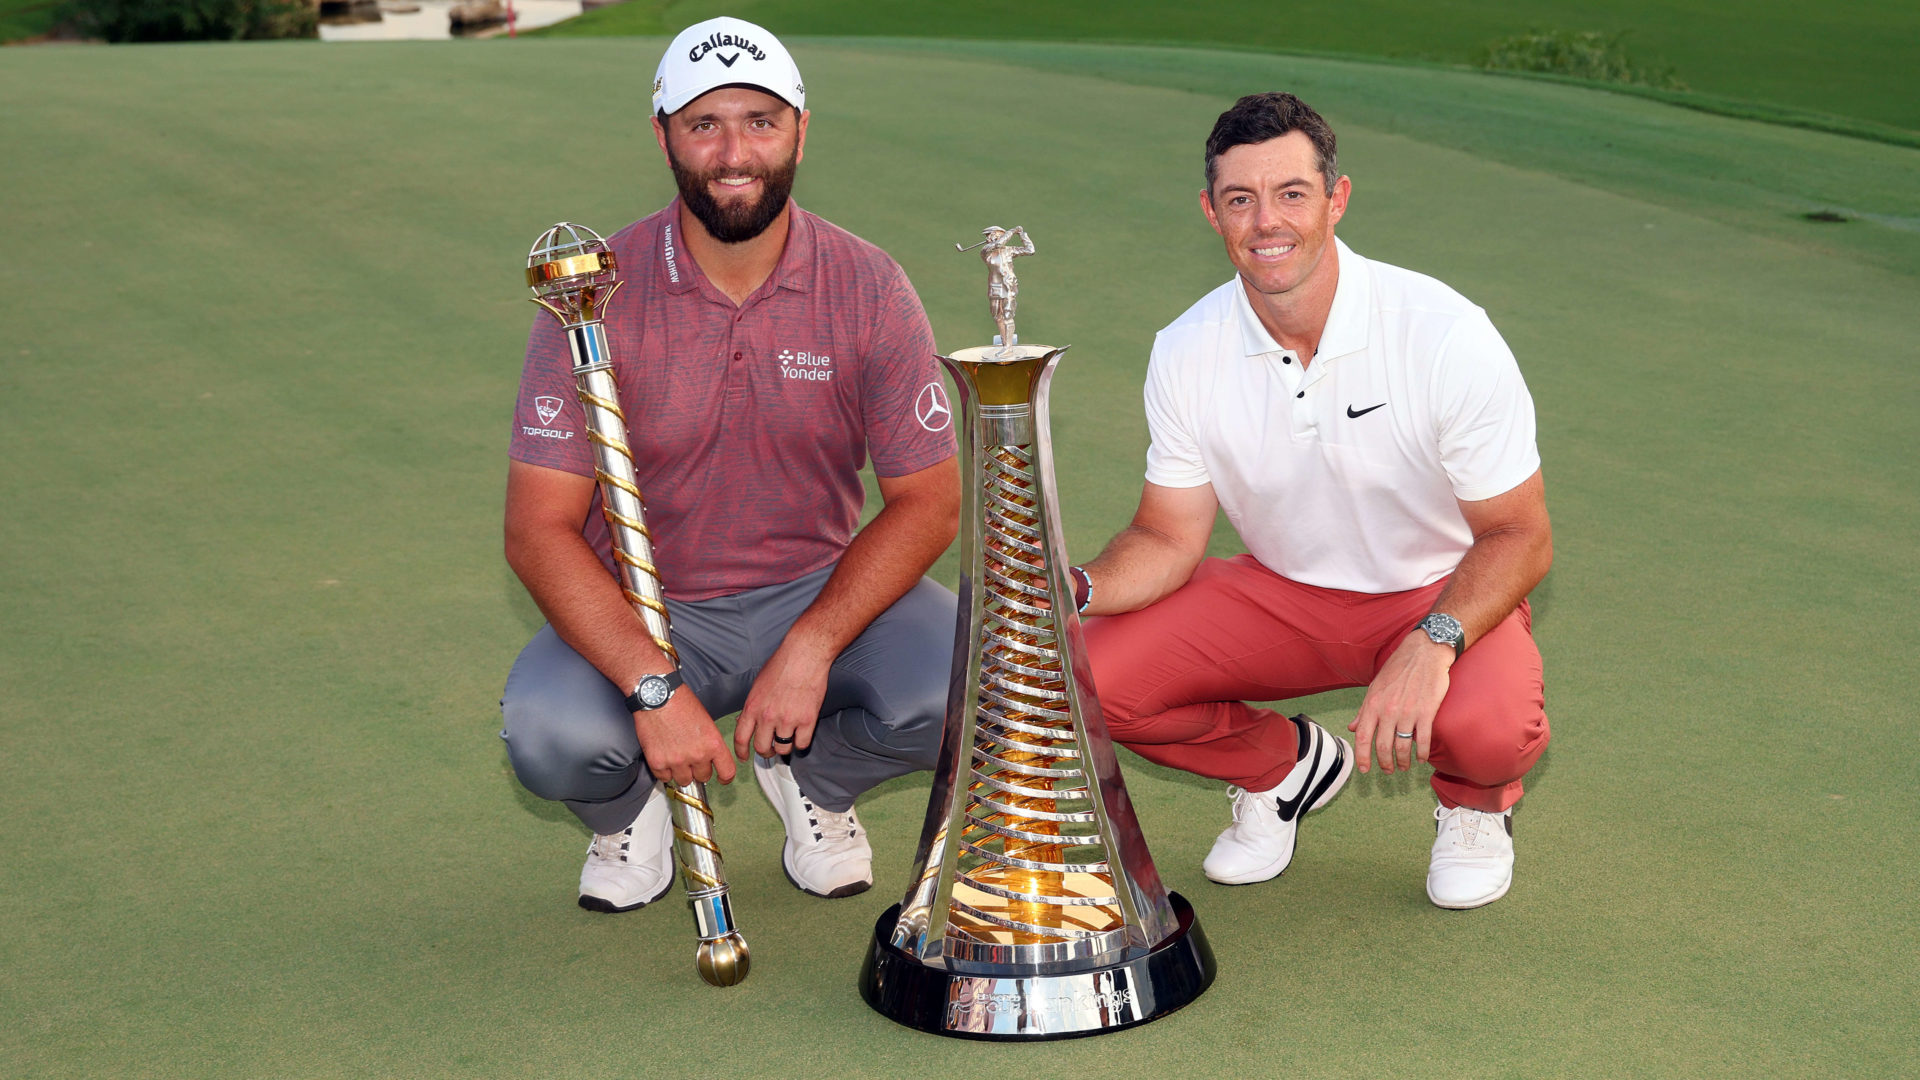 DUBAI, UNITED ARAB EMIRATES - NOVEMBER 20: Rory McIlroy of Northern Ireland poses with the Harry Vardon trophy during Day Four of the DP World Tour Championship on the Earth Course at Jumeirah Golf Estates on November 20, 2022 in Dubai, United Arab Emirates.tour new s (Photo by Andrew Redington/Getty Images)